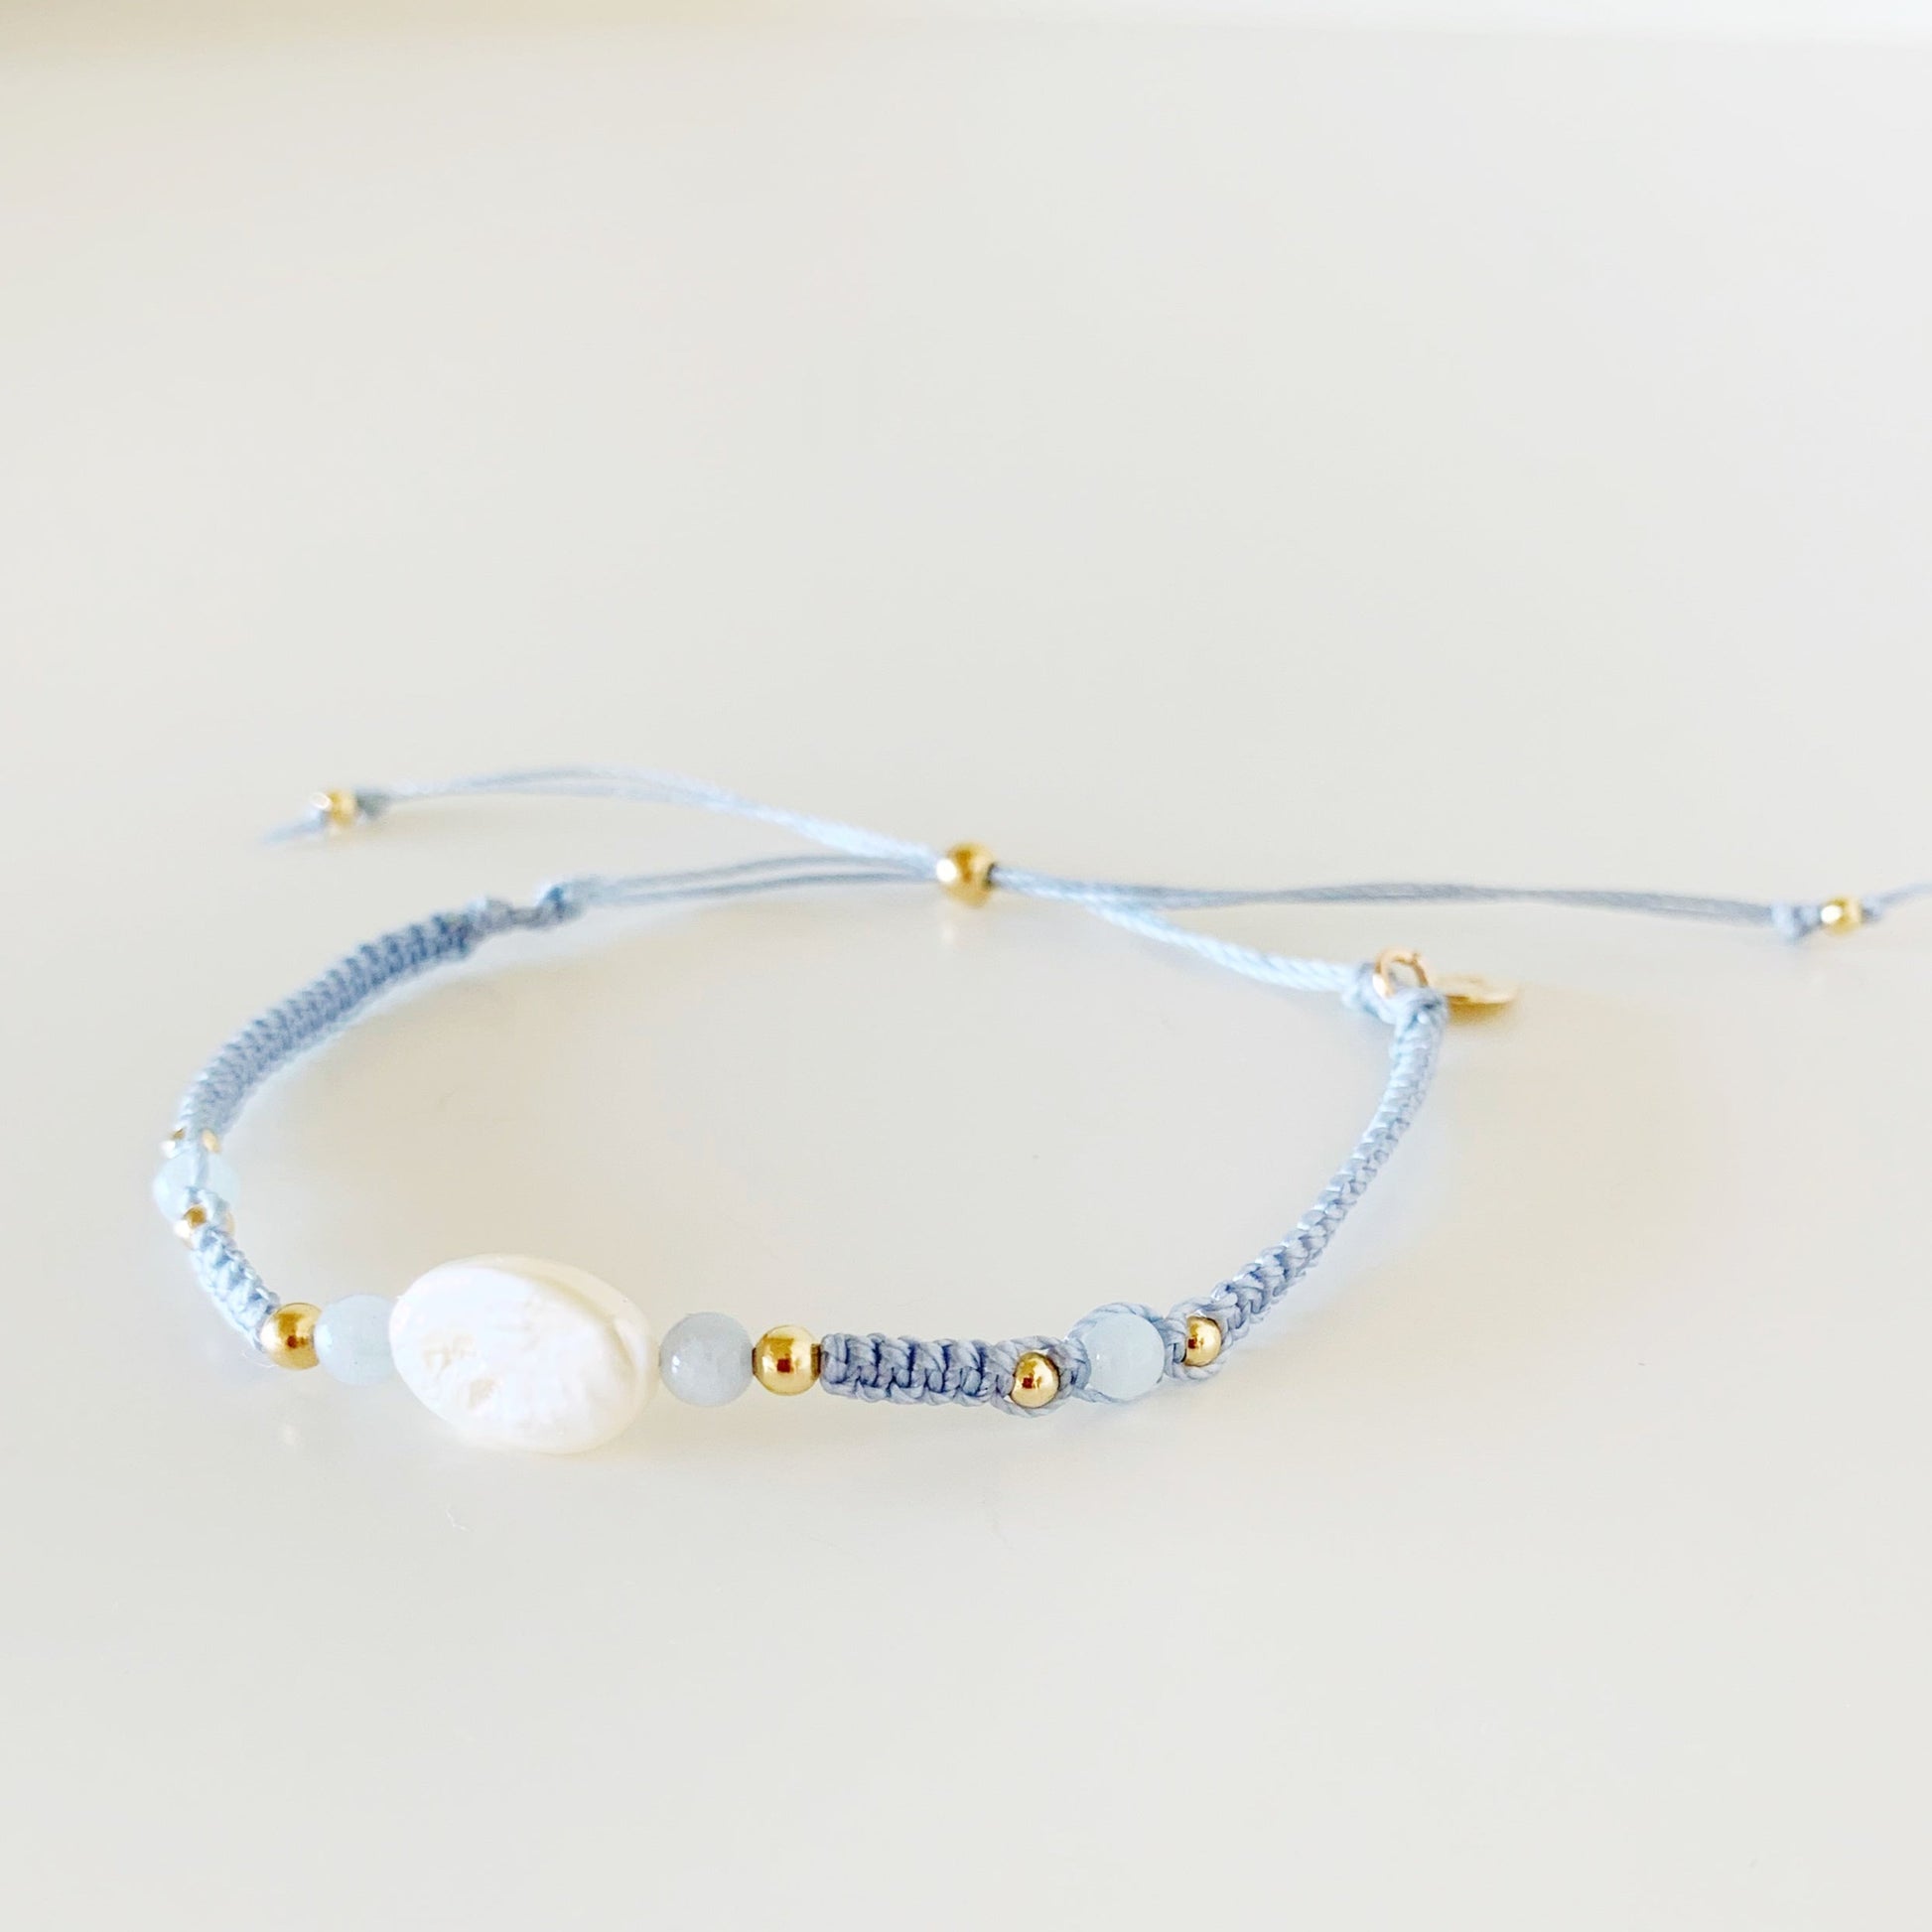 the regal seagull bracelet by mermaids and madeleines is an adjustable macrame bracelet with blue-gray cord with a freshwater oval pearl at the center with 4mm aquamarine beads on either side. this bracelet is photographed from a slight right angle with the piece on a white surface